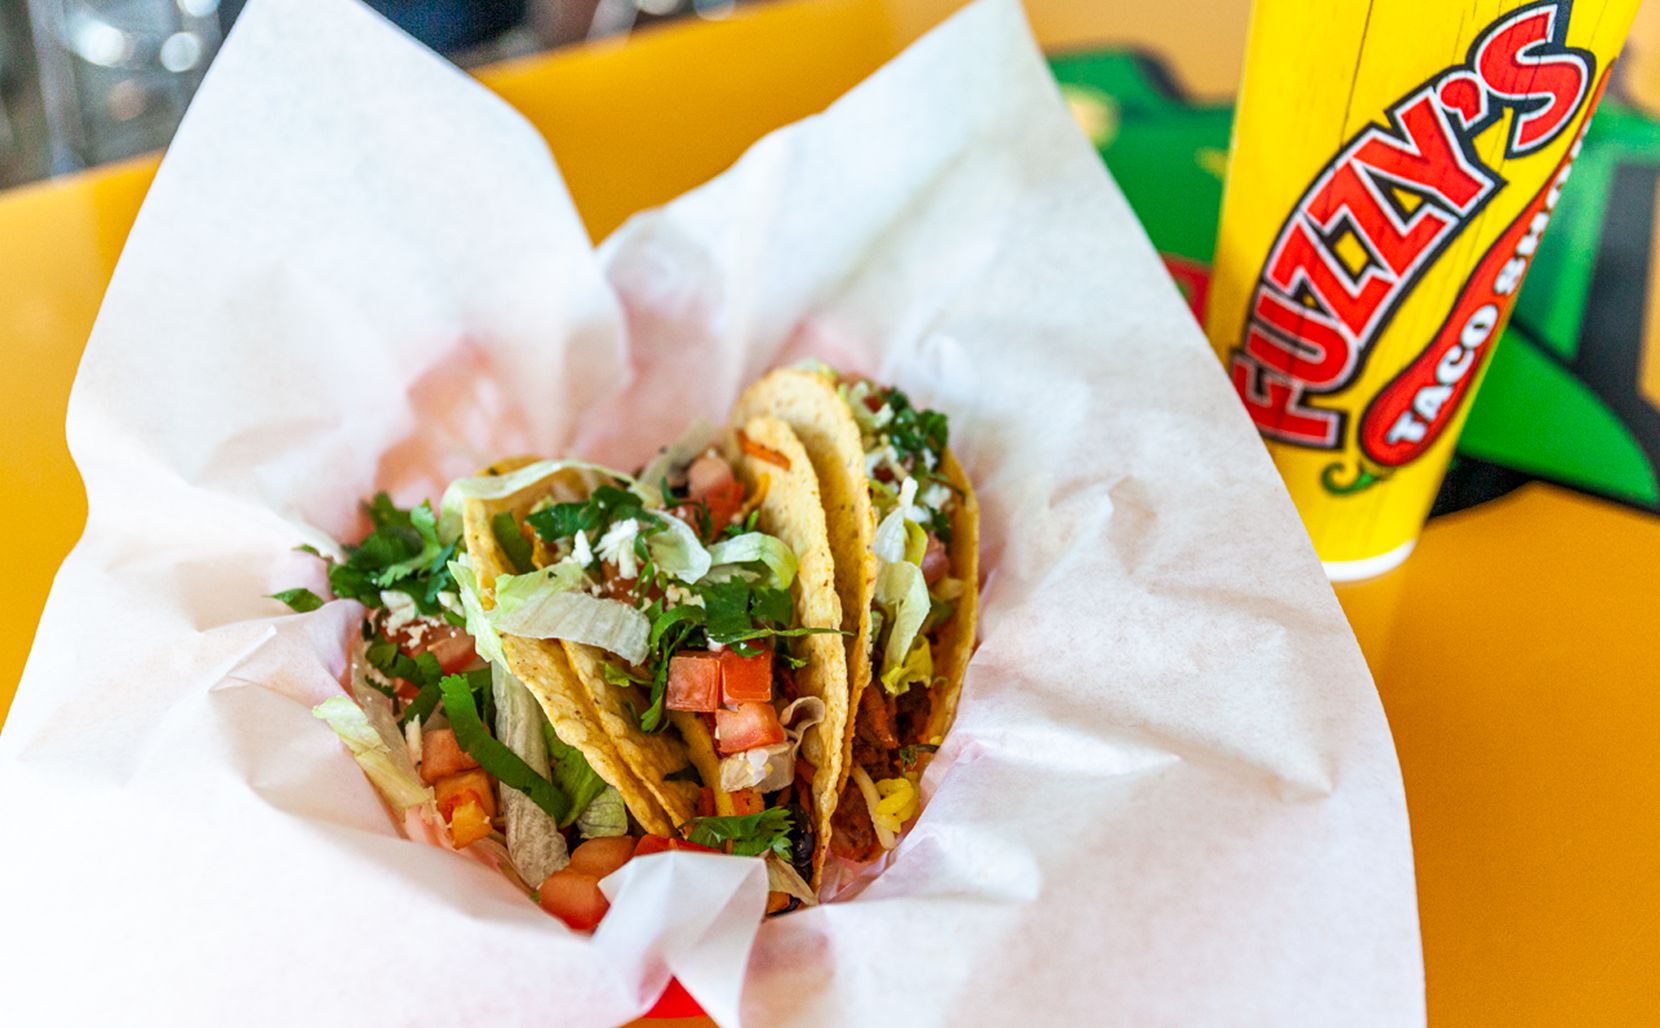 Fuzzy's Taco Shop is open for patio dining and takeout.